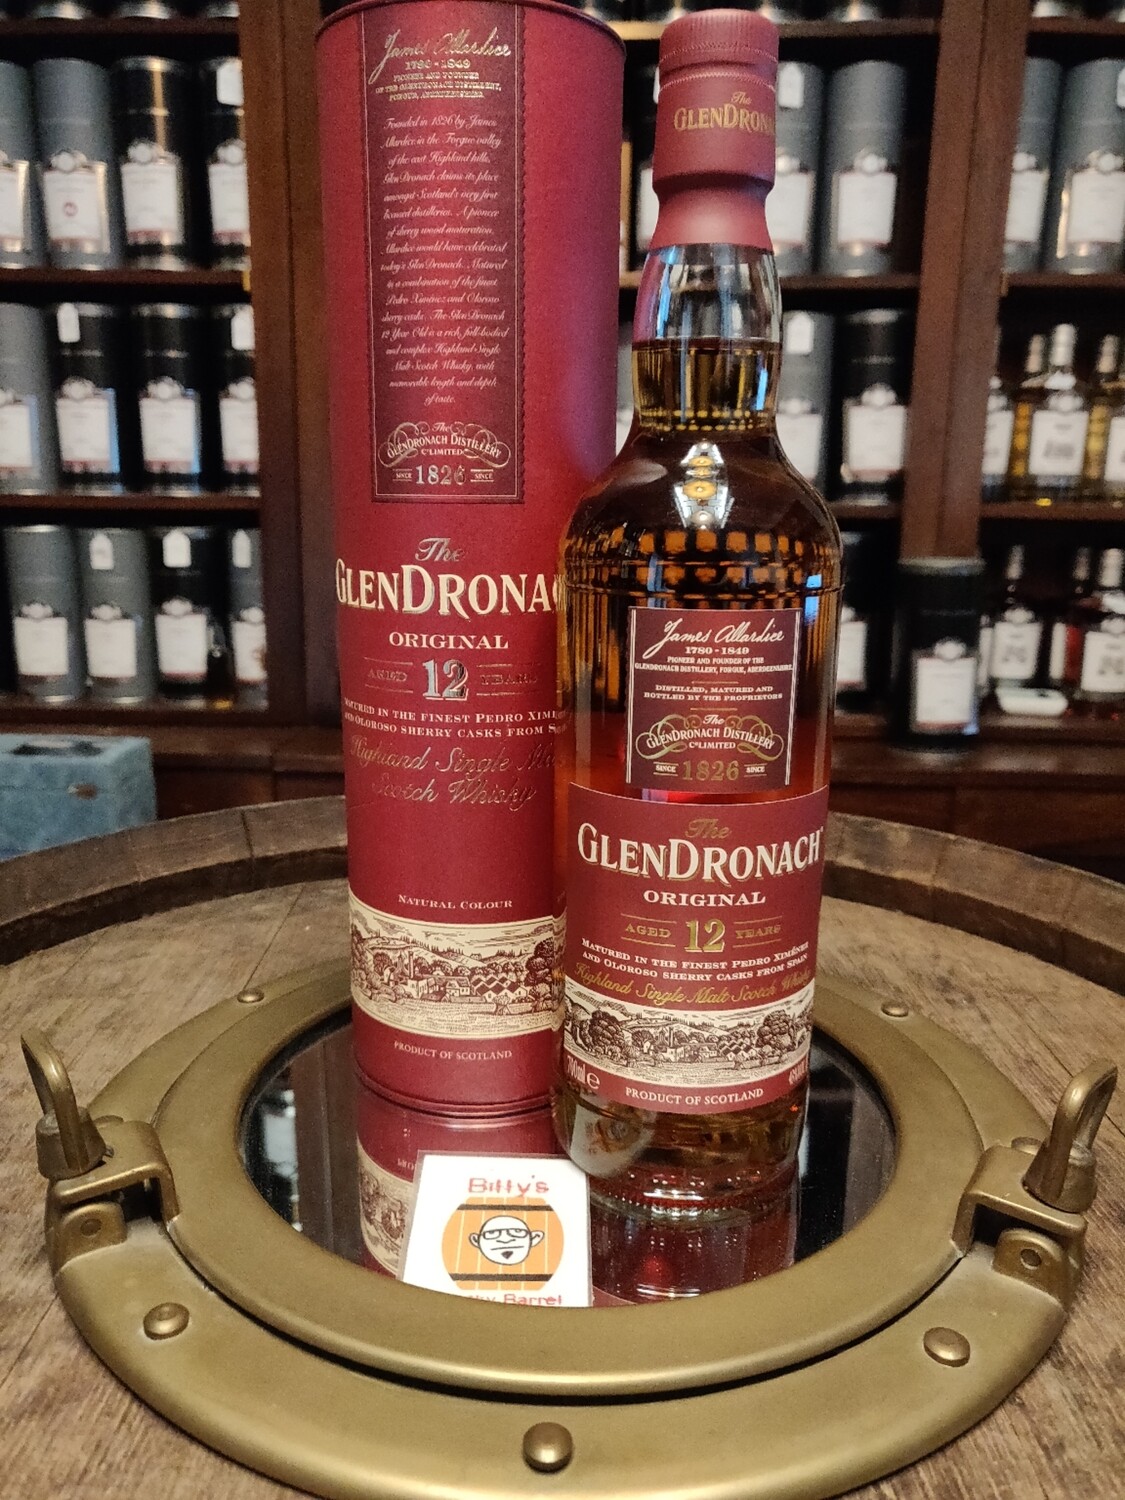 Glendronach 12 years old